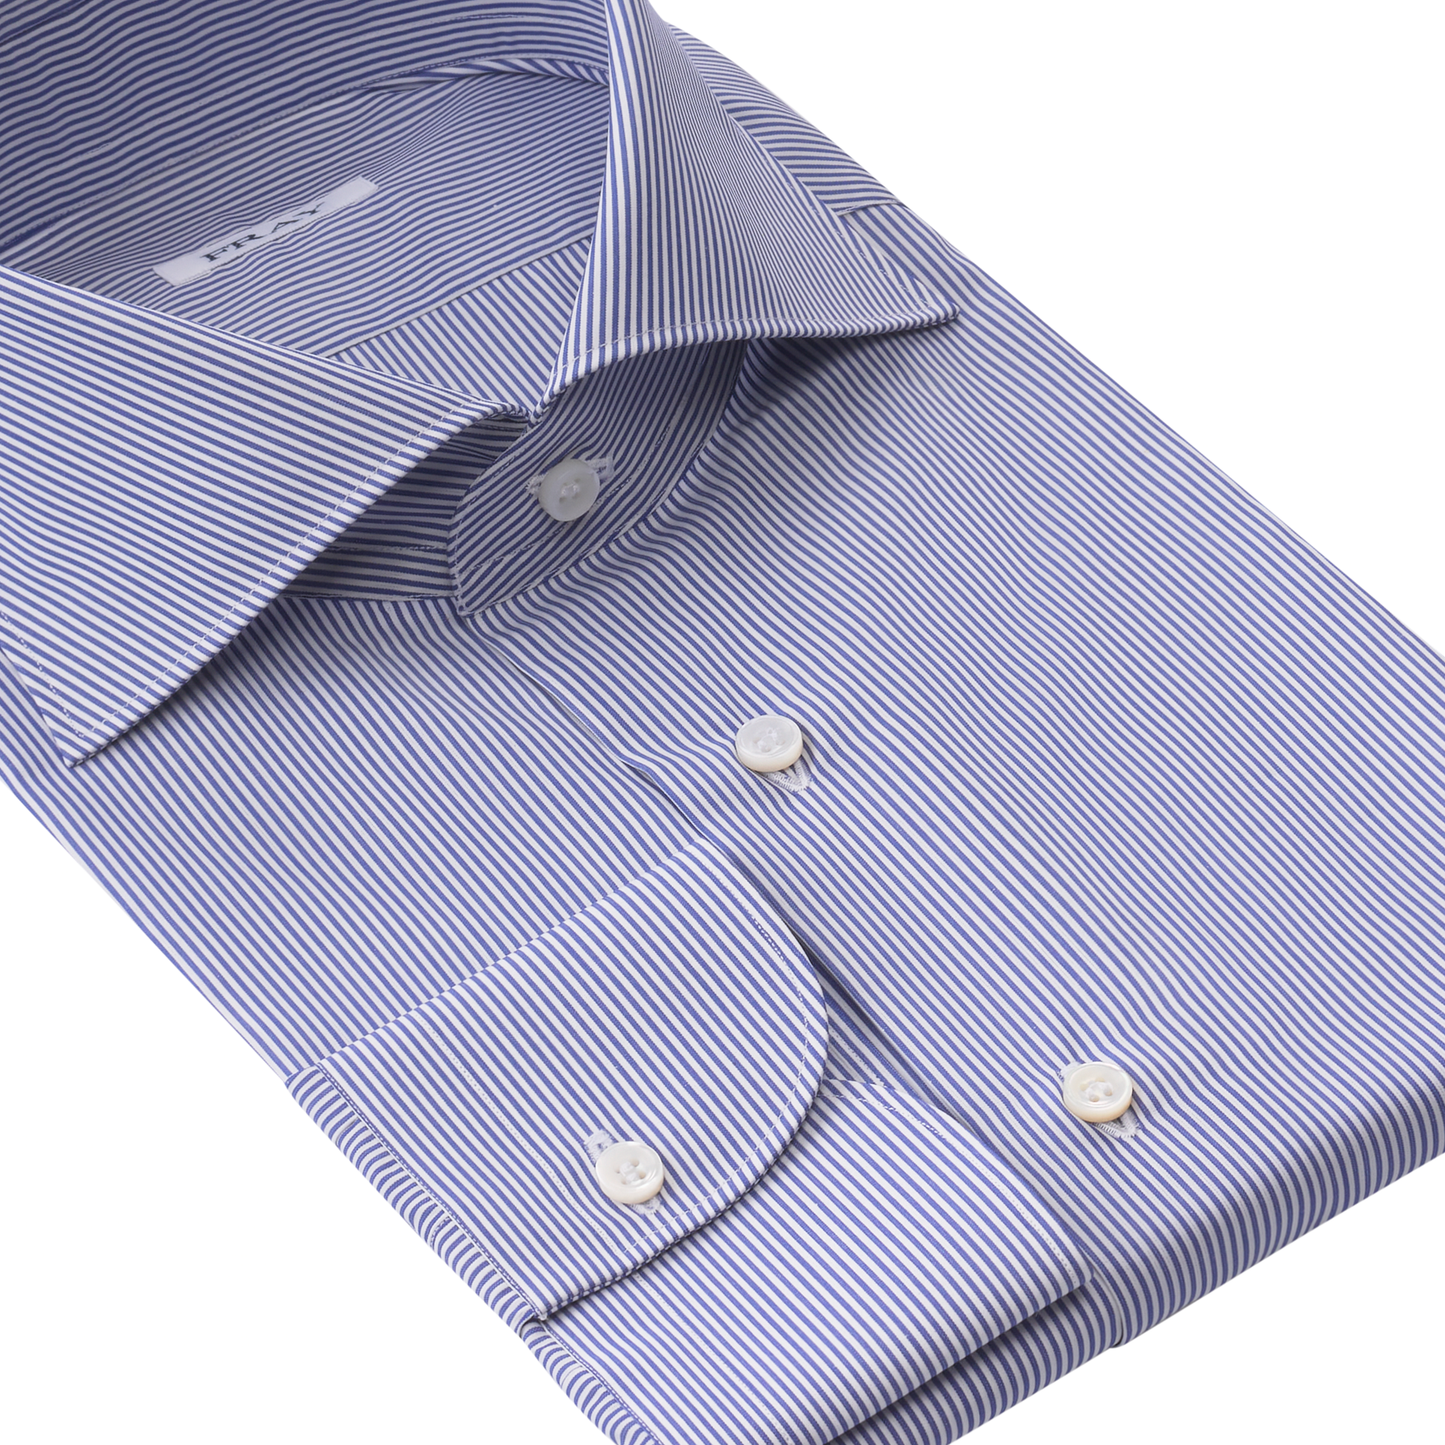 Fray Fine Striped Cotton Shirt in Blue and White - SARTALE